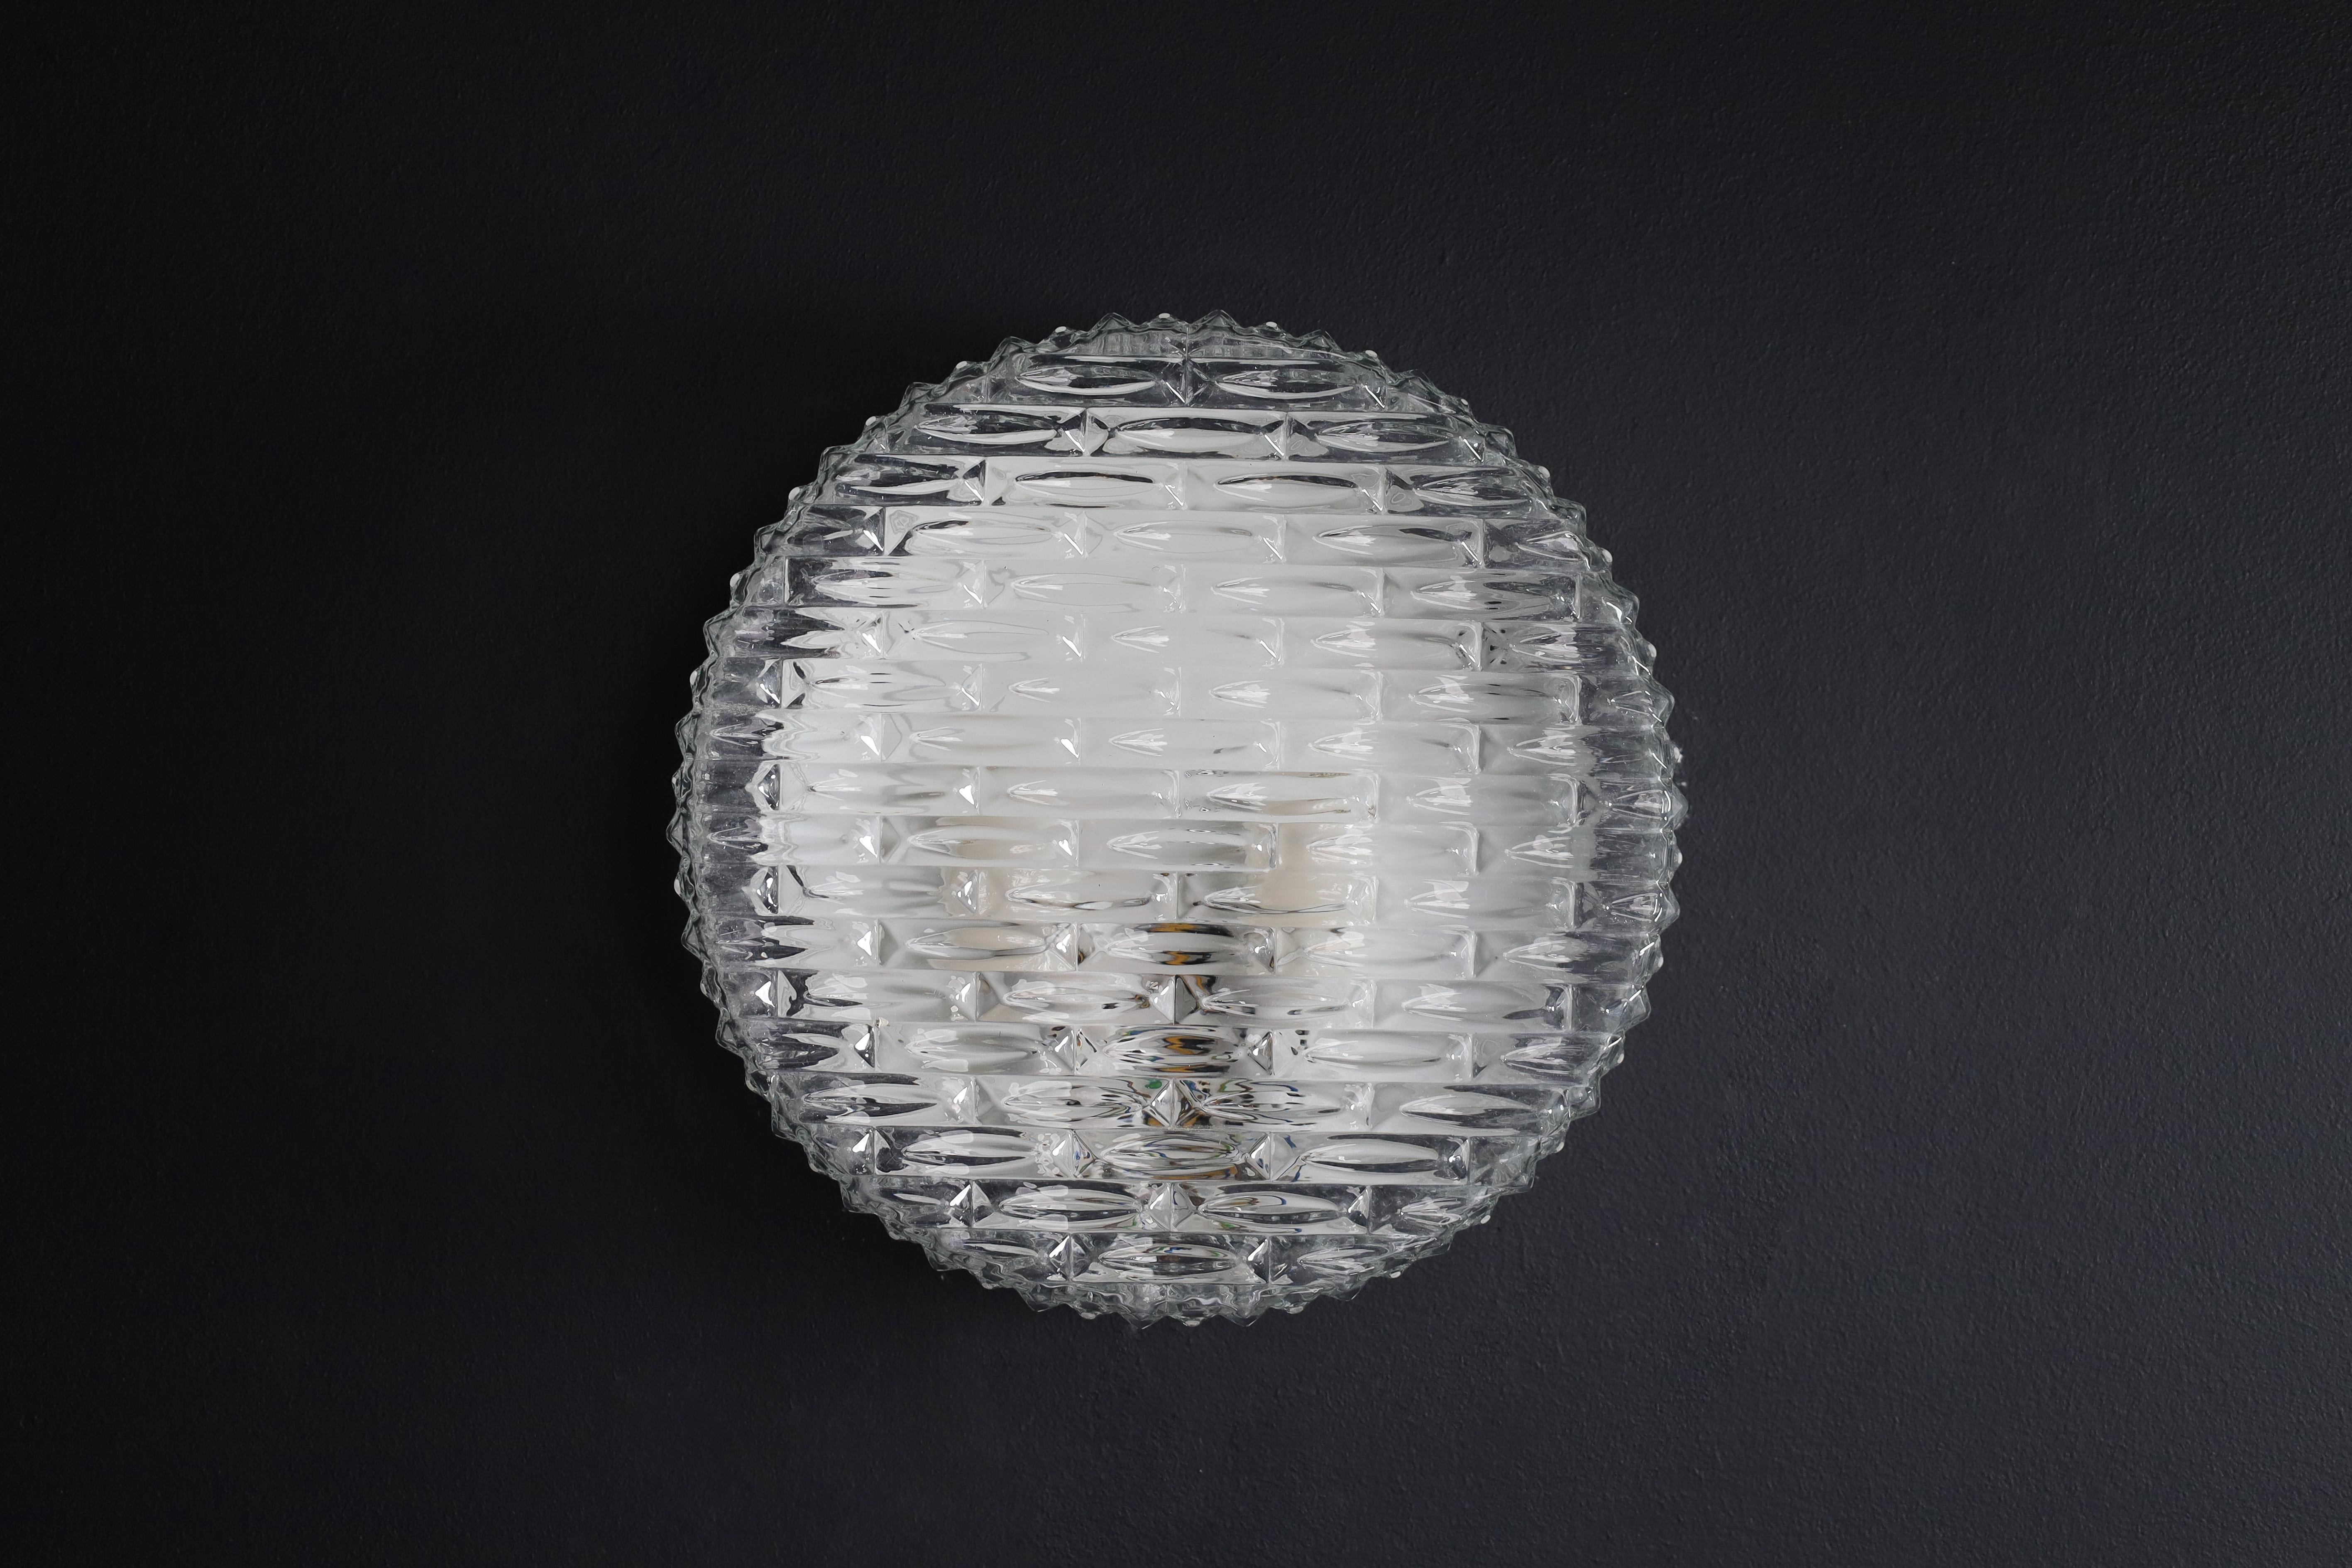 Round Ceiling or wall light Germany 1960s.

Round flush mount ceiling light or wall light made of heavy textured clear iced glass made in Germany, 1960s. This midcentury vintage lamp illuminates beautifully, casting a warm glow over a ceiling or